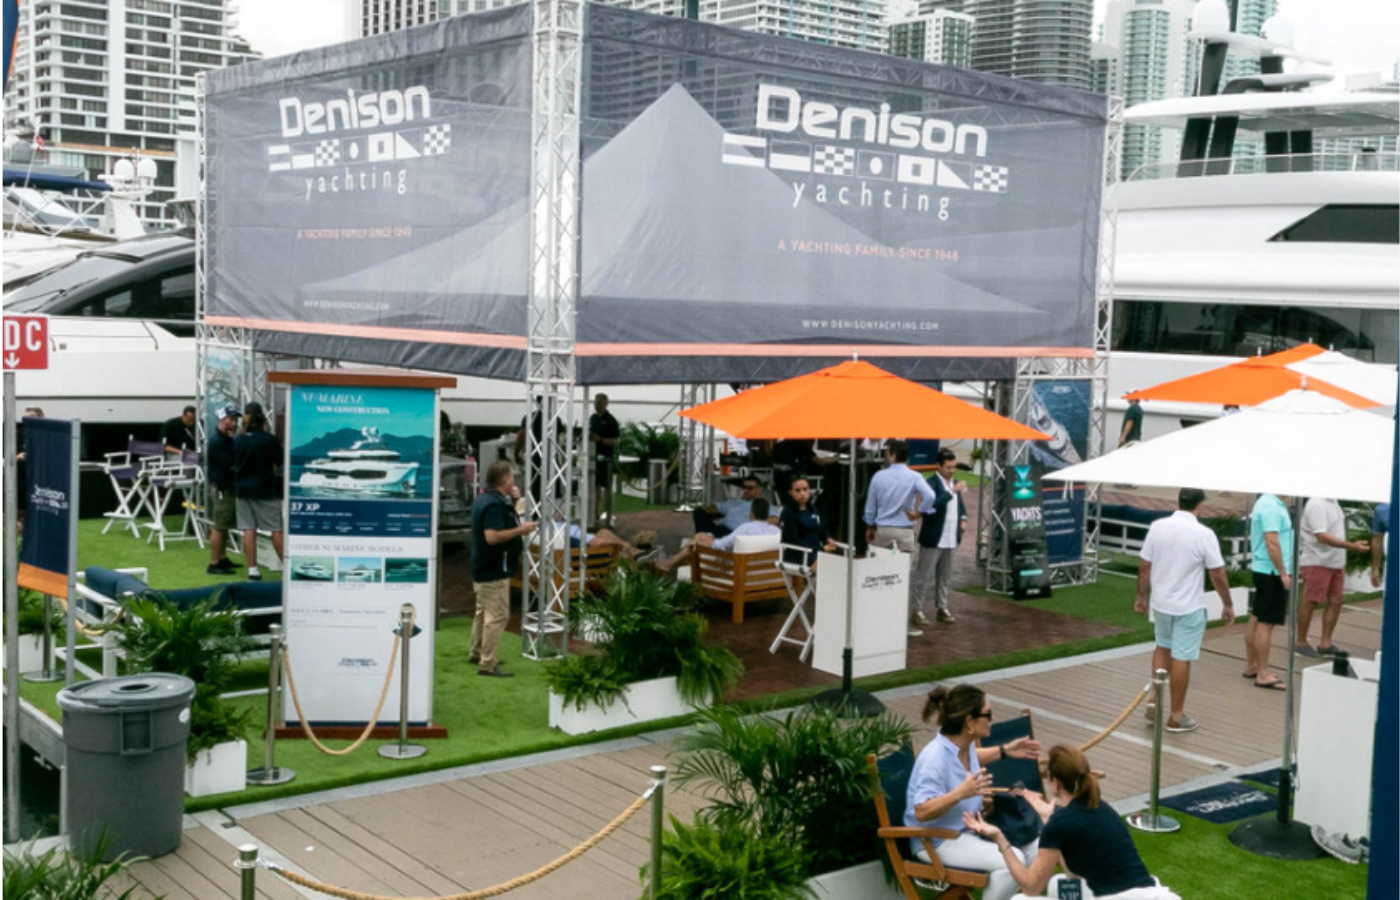 Denison Yachting Exhibits at The Discover Boating Miami International Boat Show [In the News]